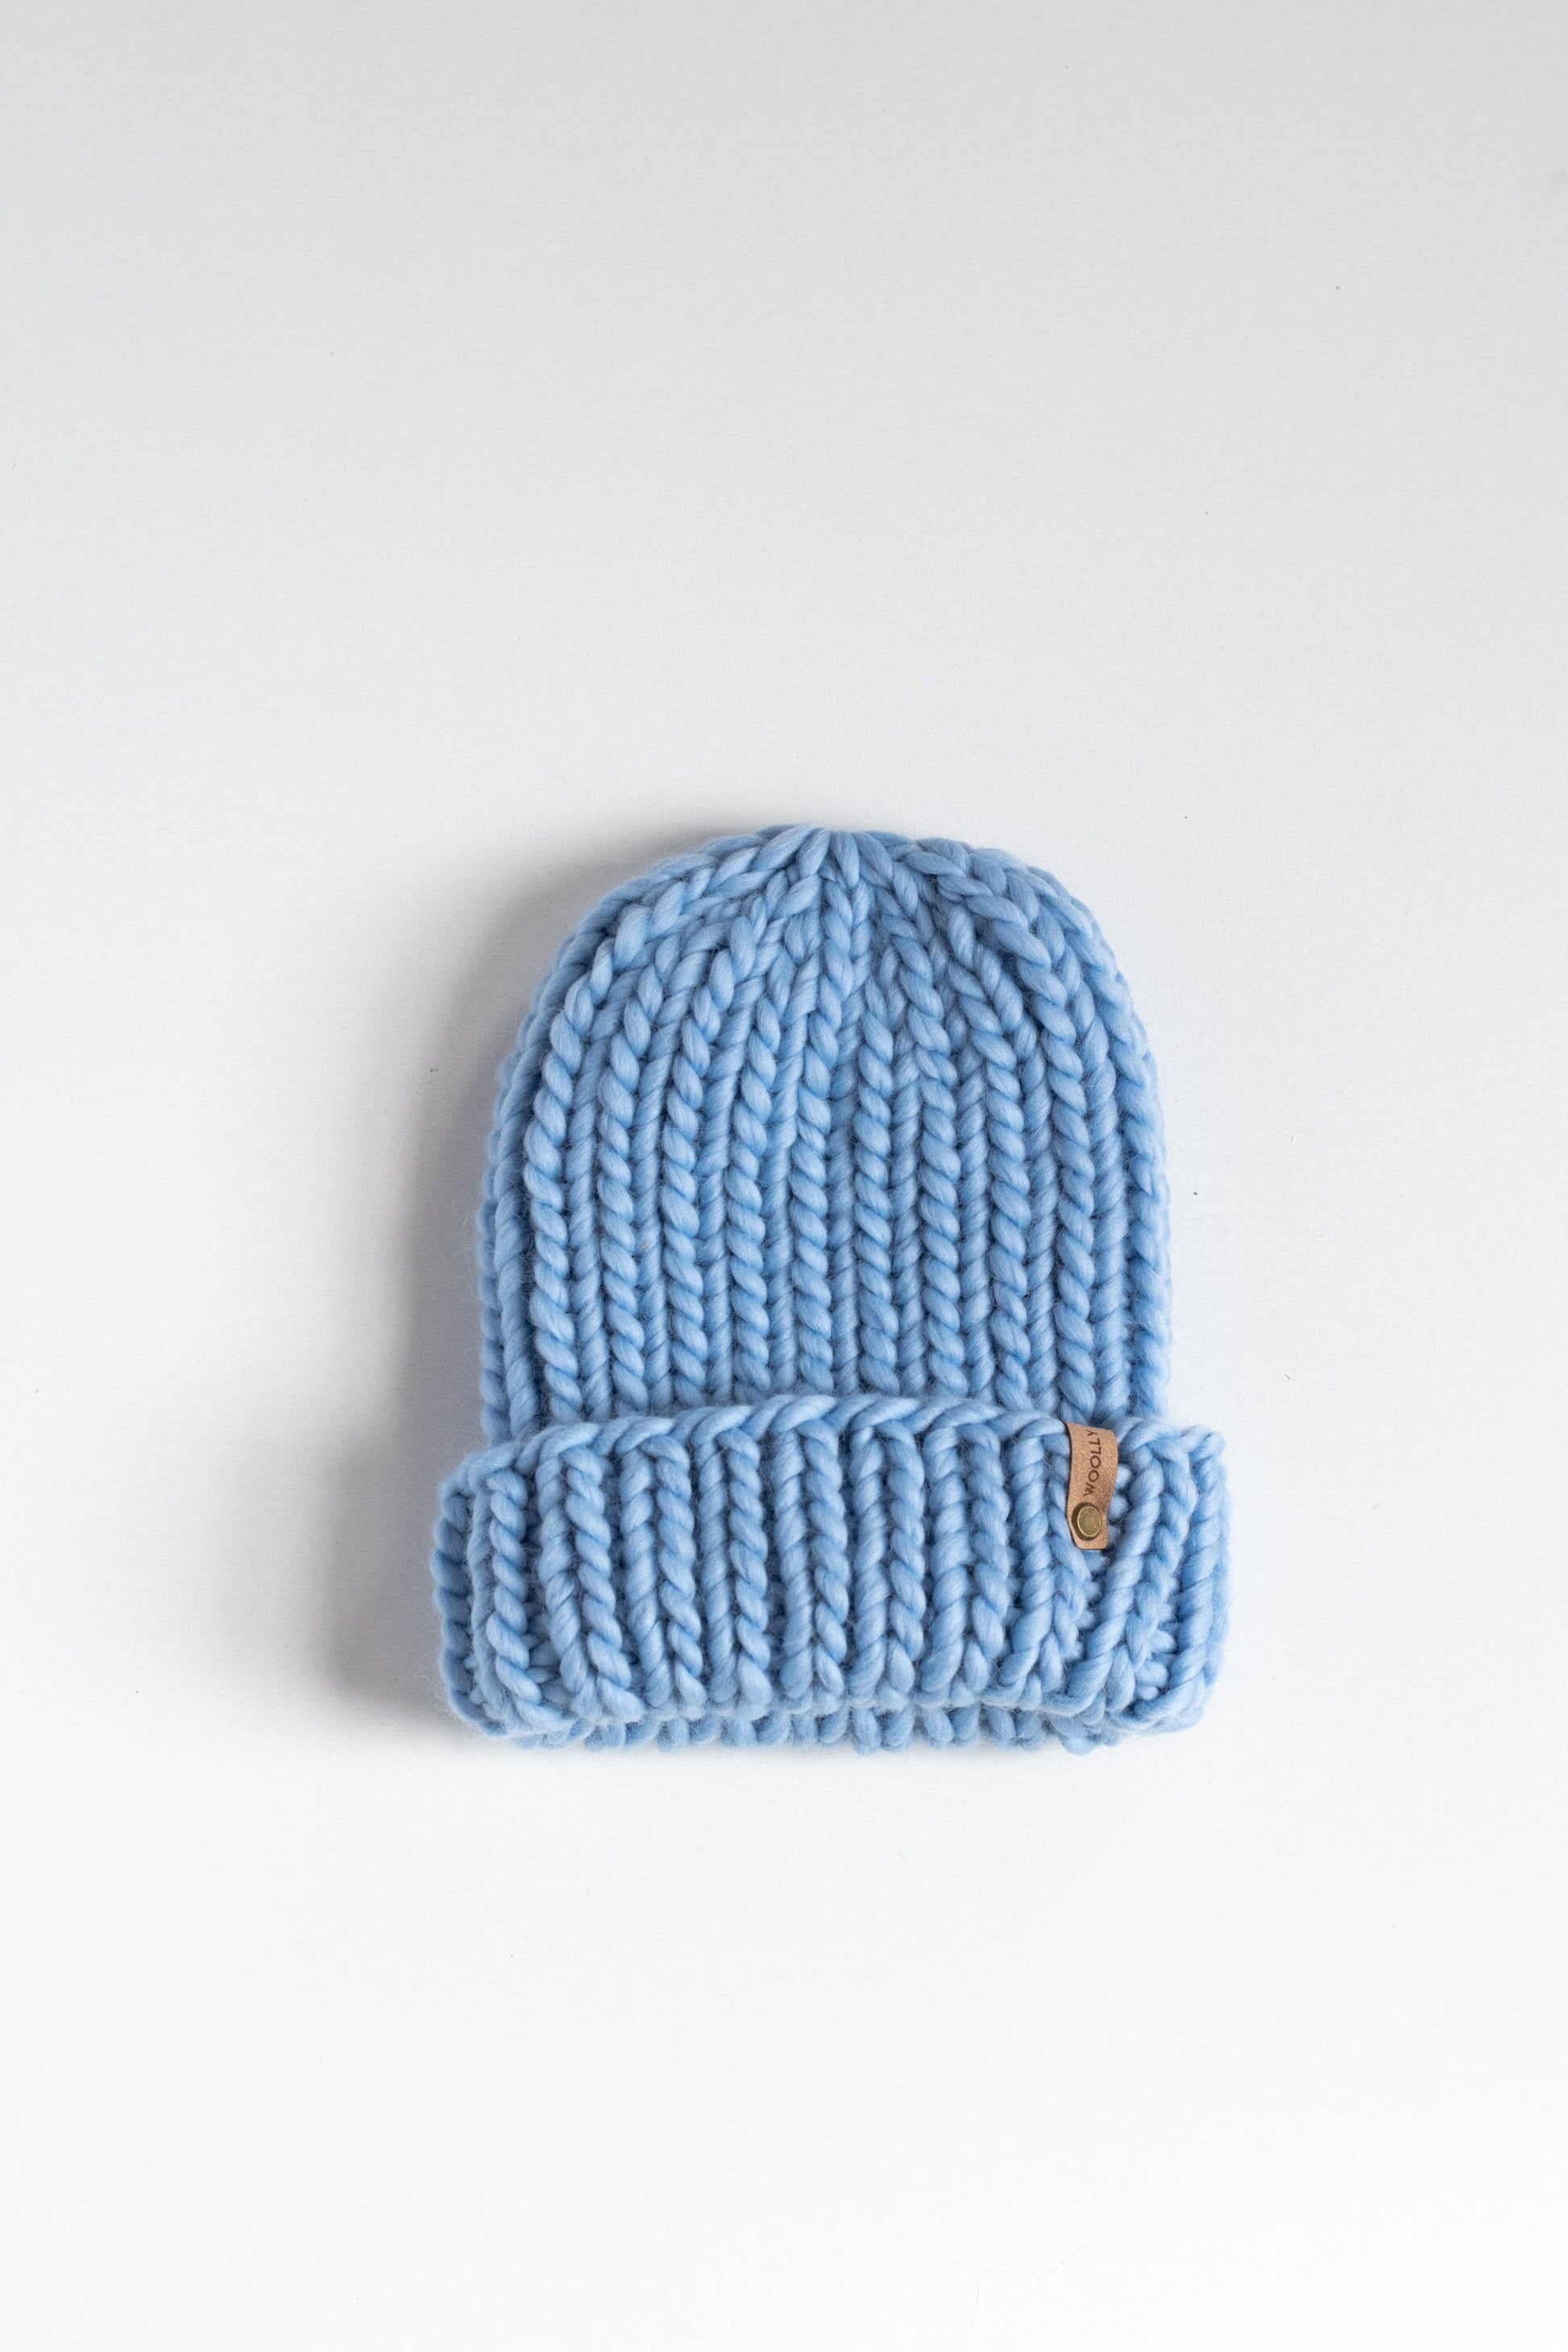 Icy Blue Peruvian Wool Ribbed Knit Hat with Pom Pom and Folded Brim, Luxury Chunky Knit Beanie, Ethically Sourced Wool Hat, Hand Knit Hat